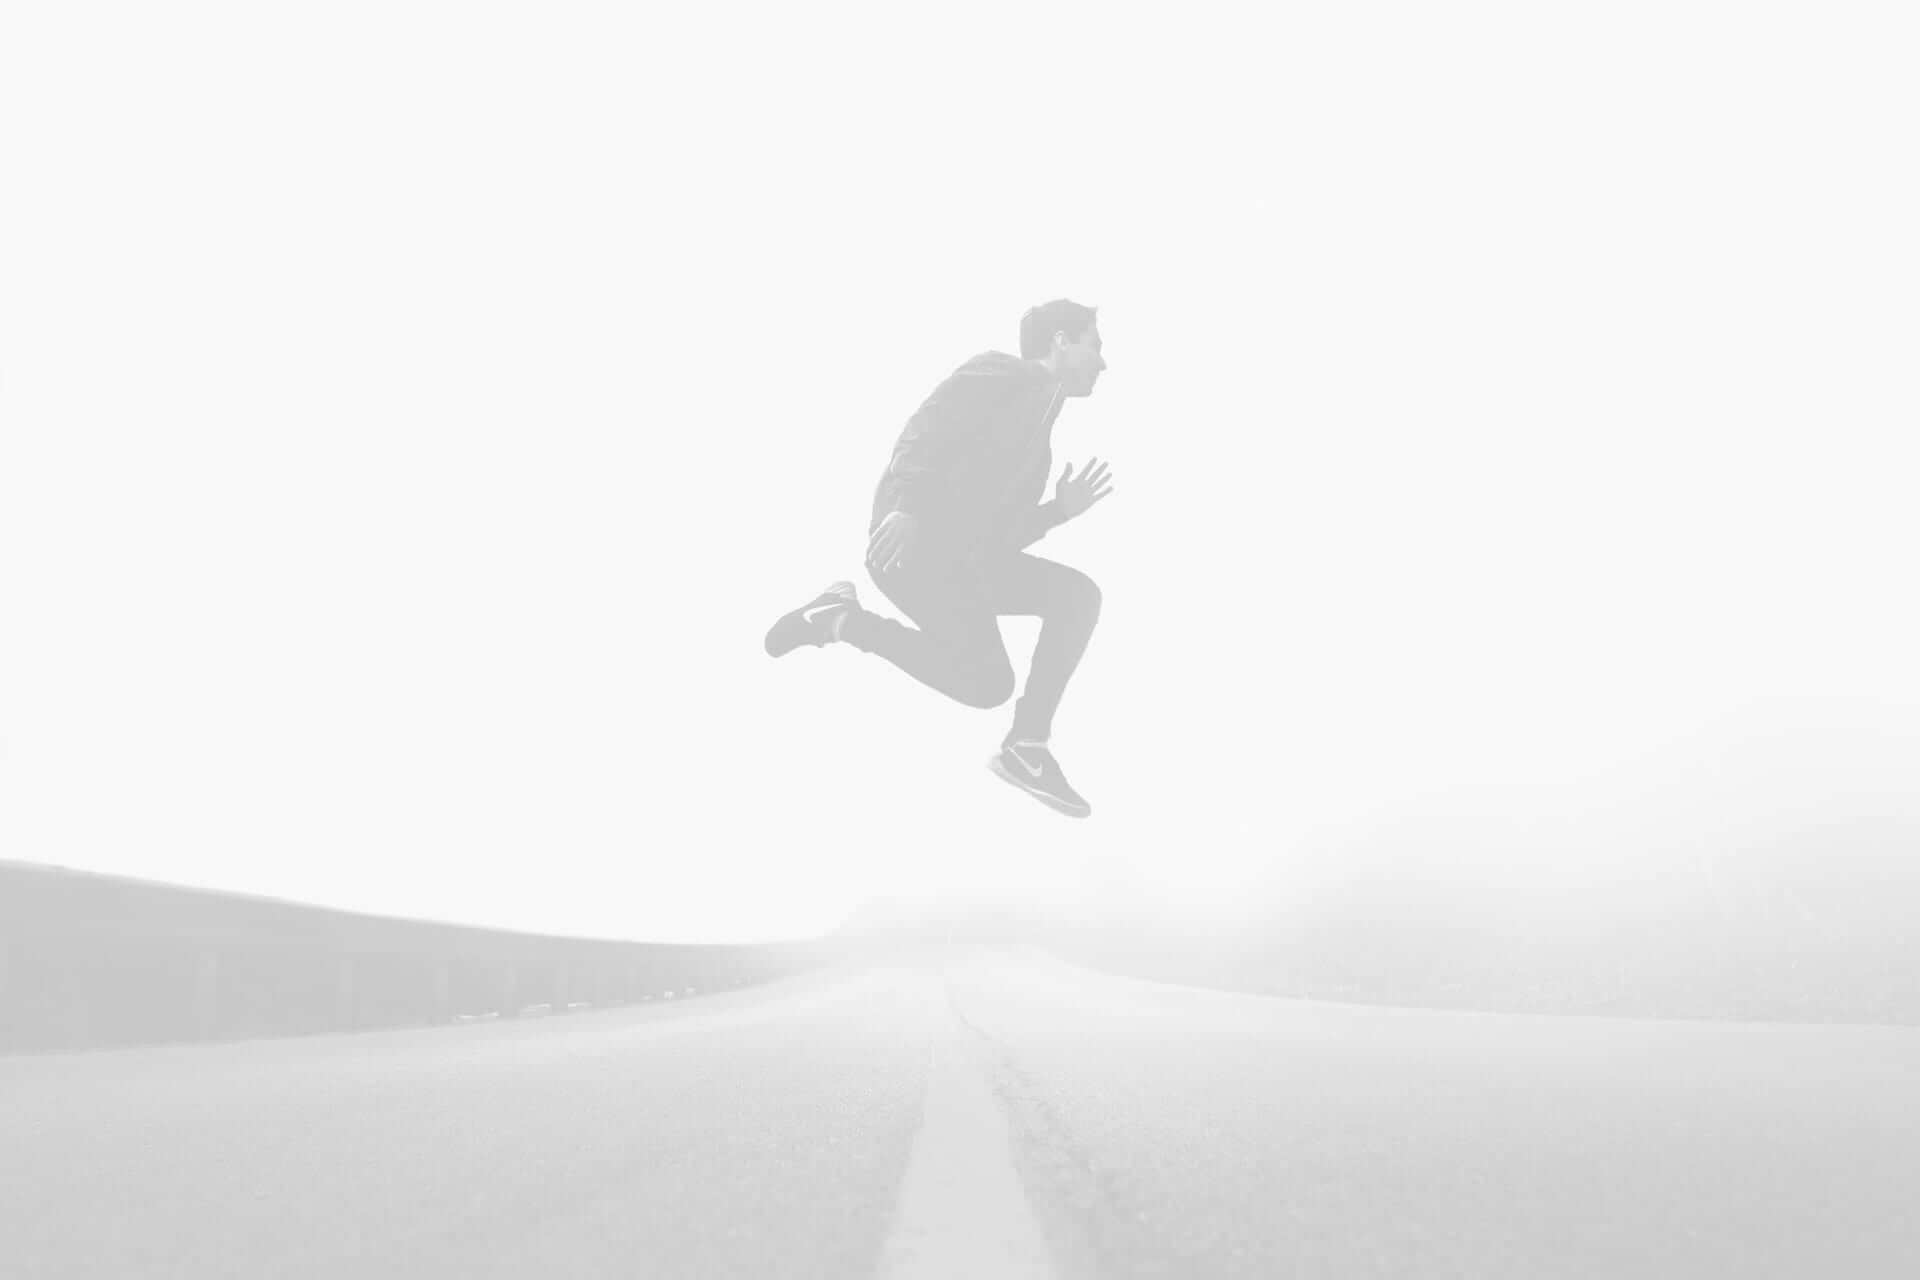 A man in a suit appears to levitate above a foggy road, captured in mid-air with a stark white background.